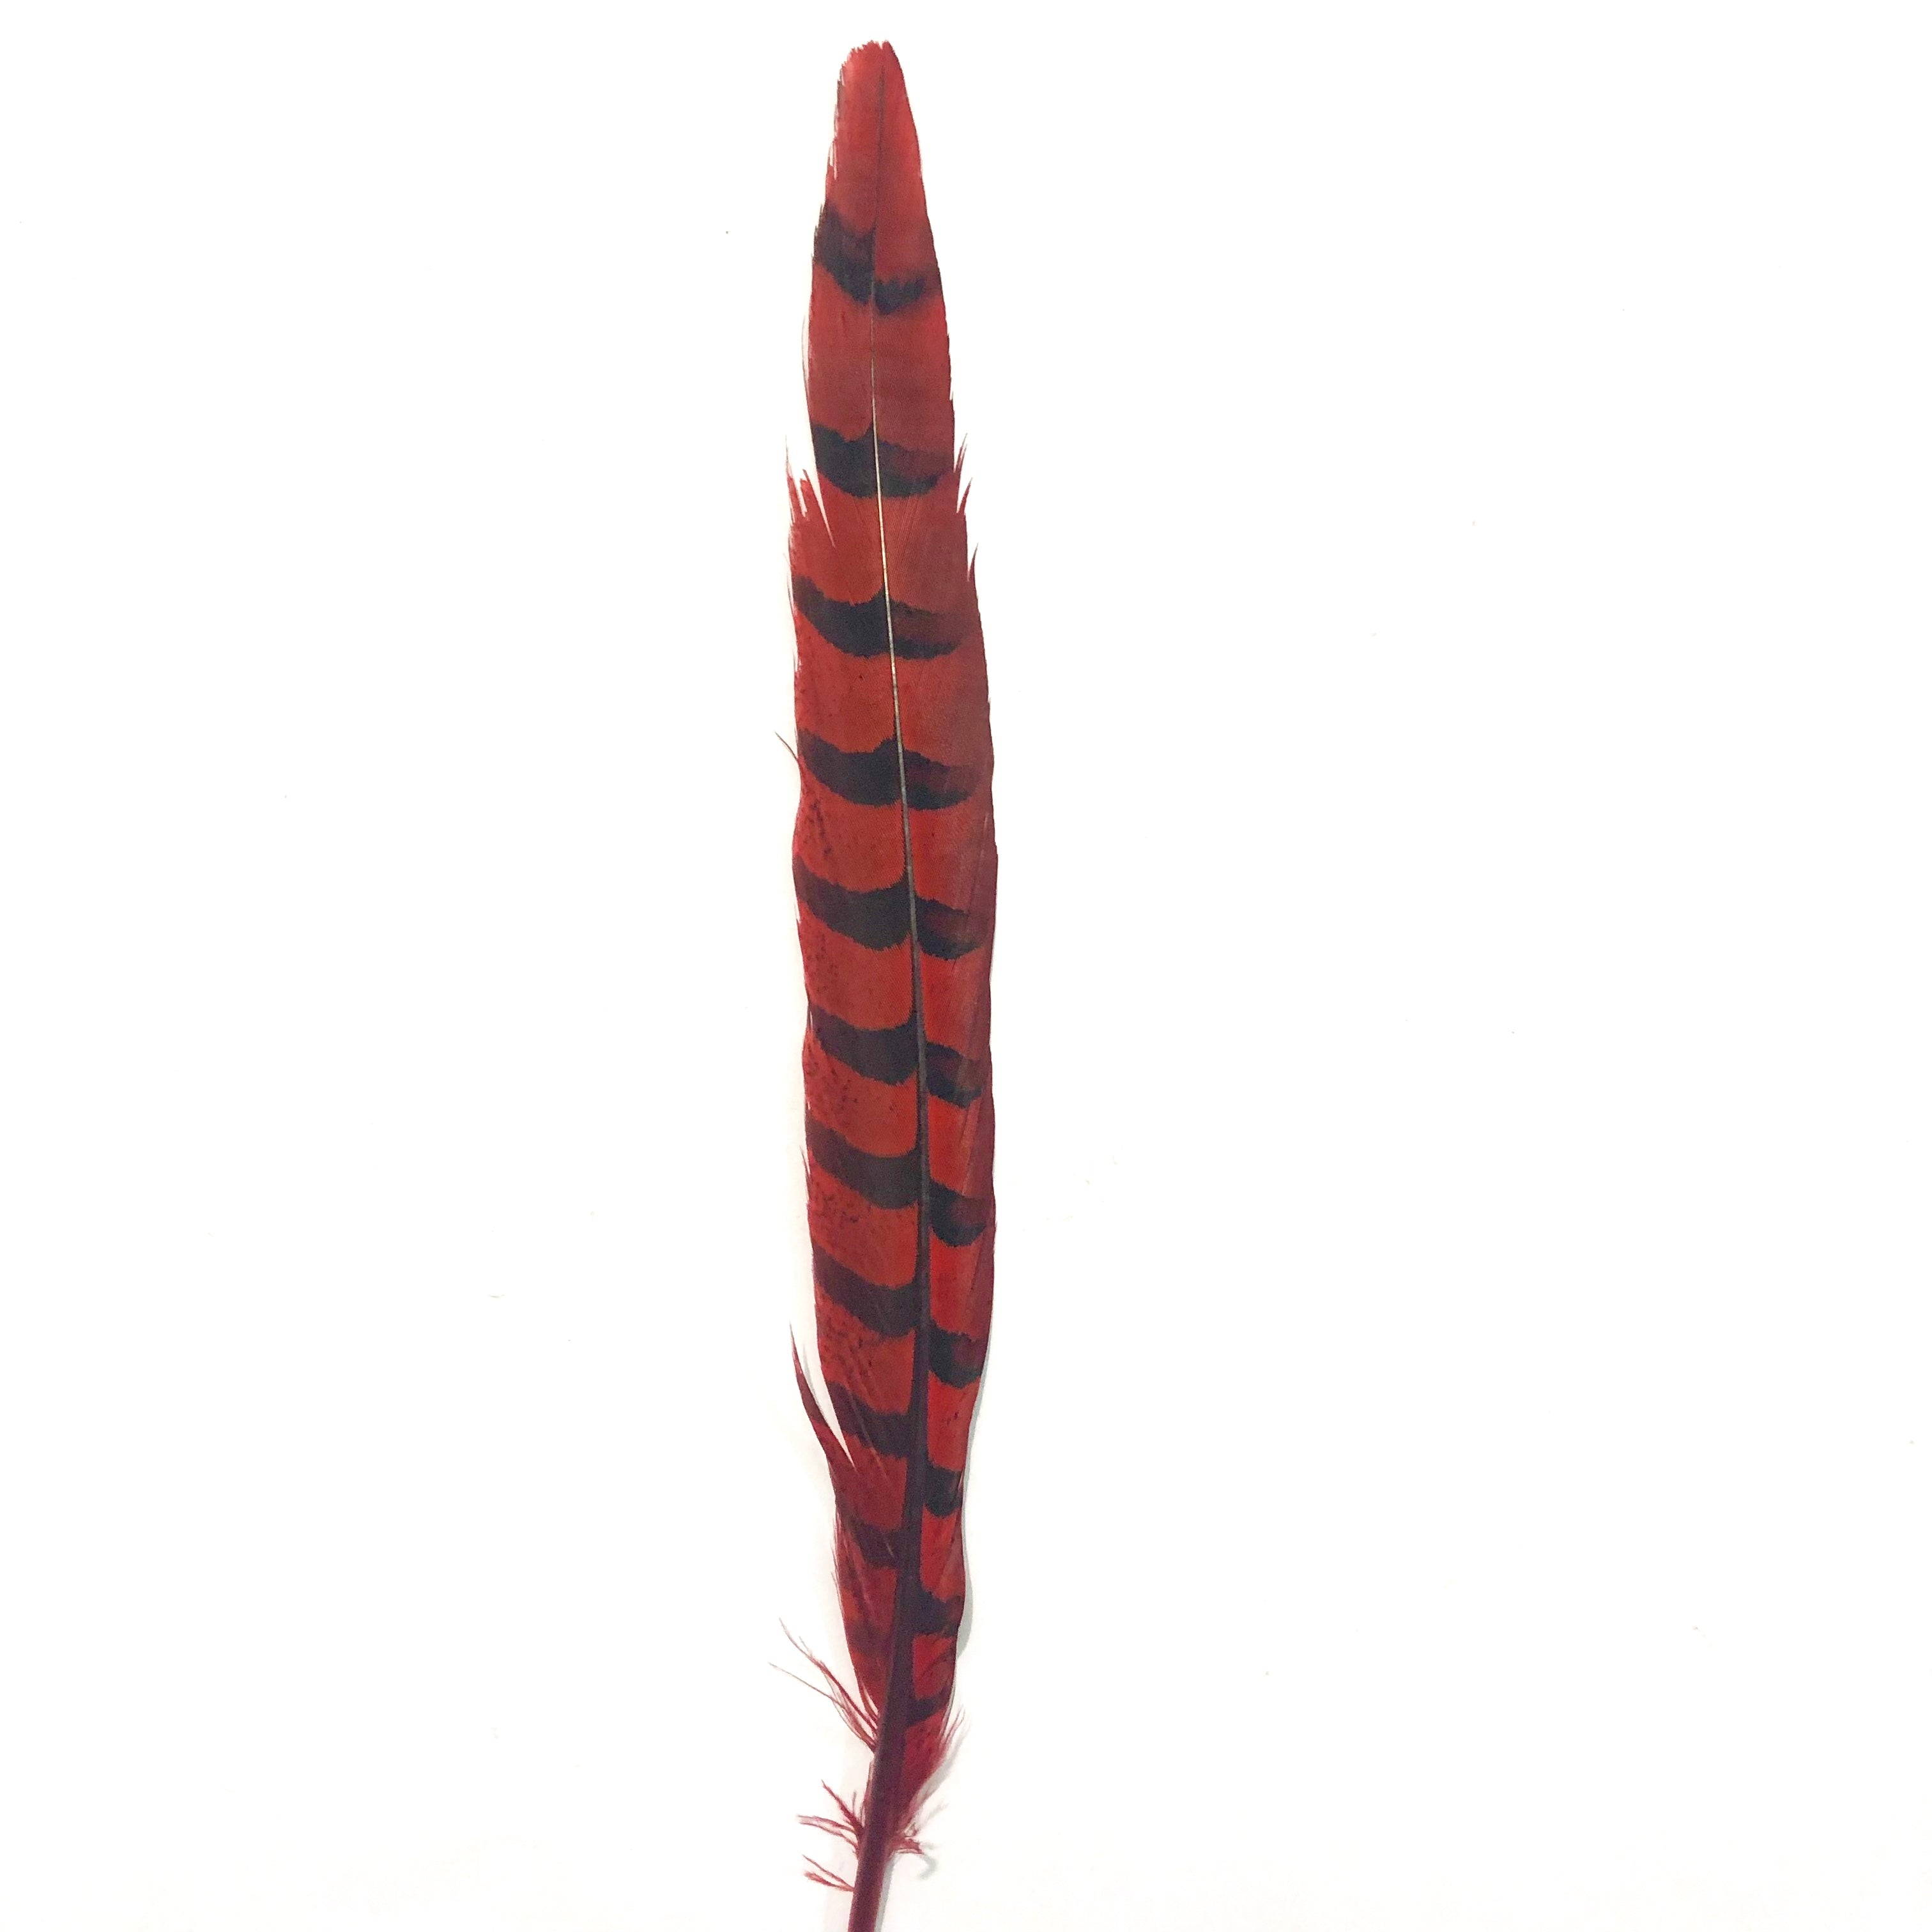 12" to 14" Reeves Pheasant Tail Feather - Red ((SECONDS))